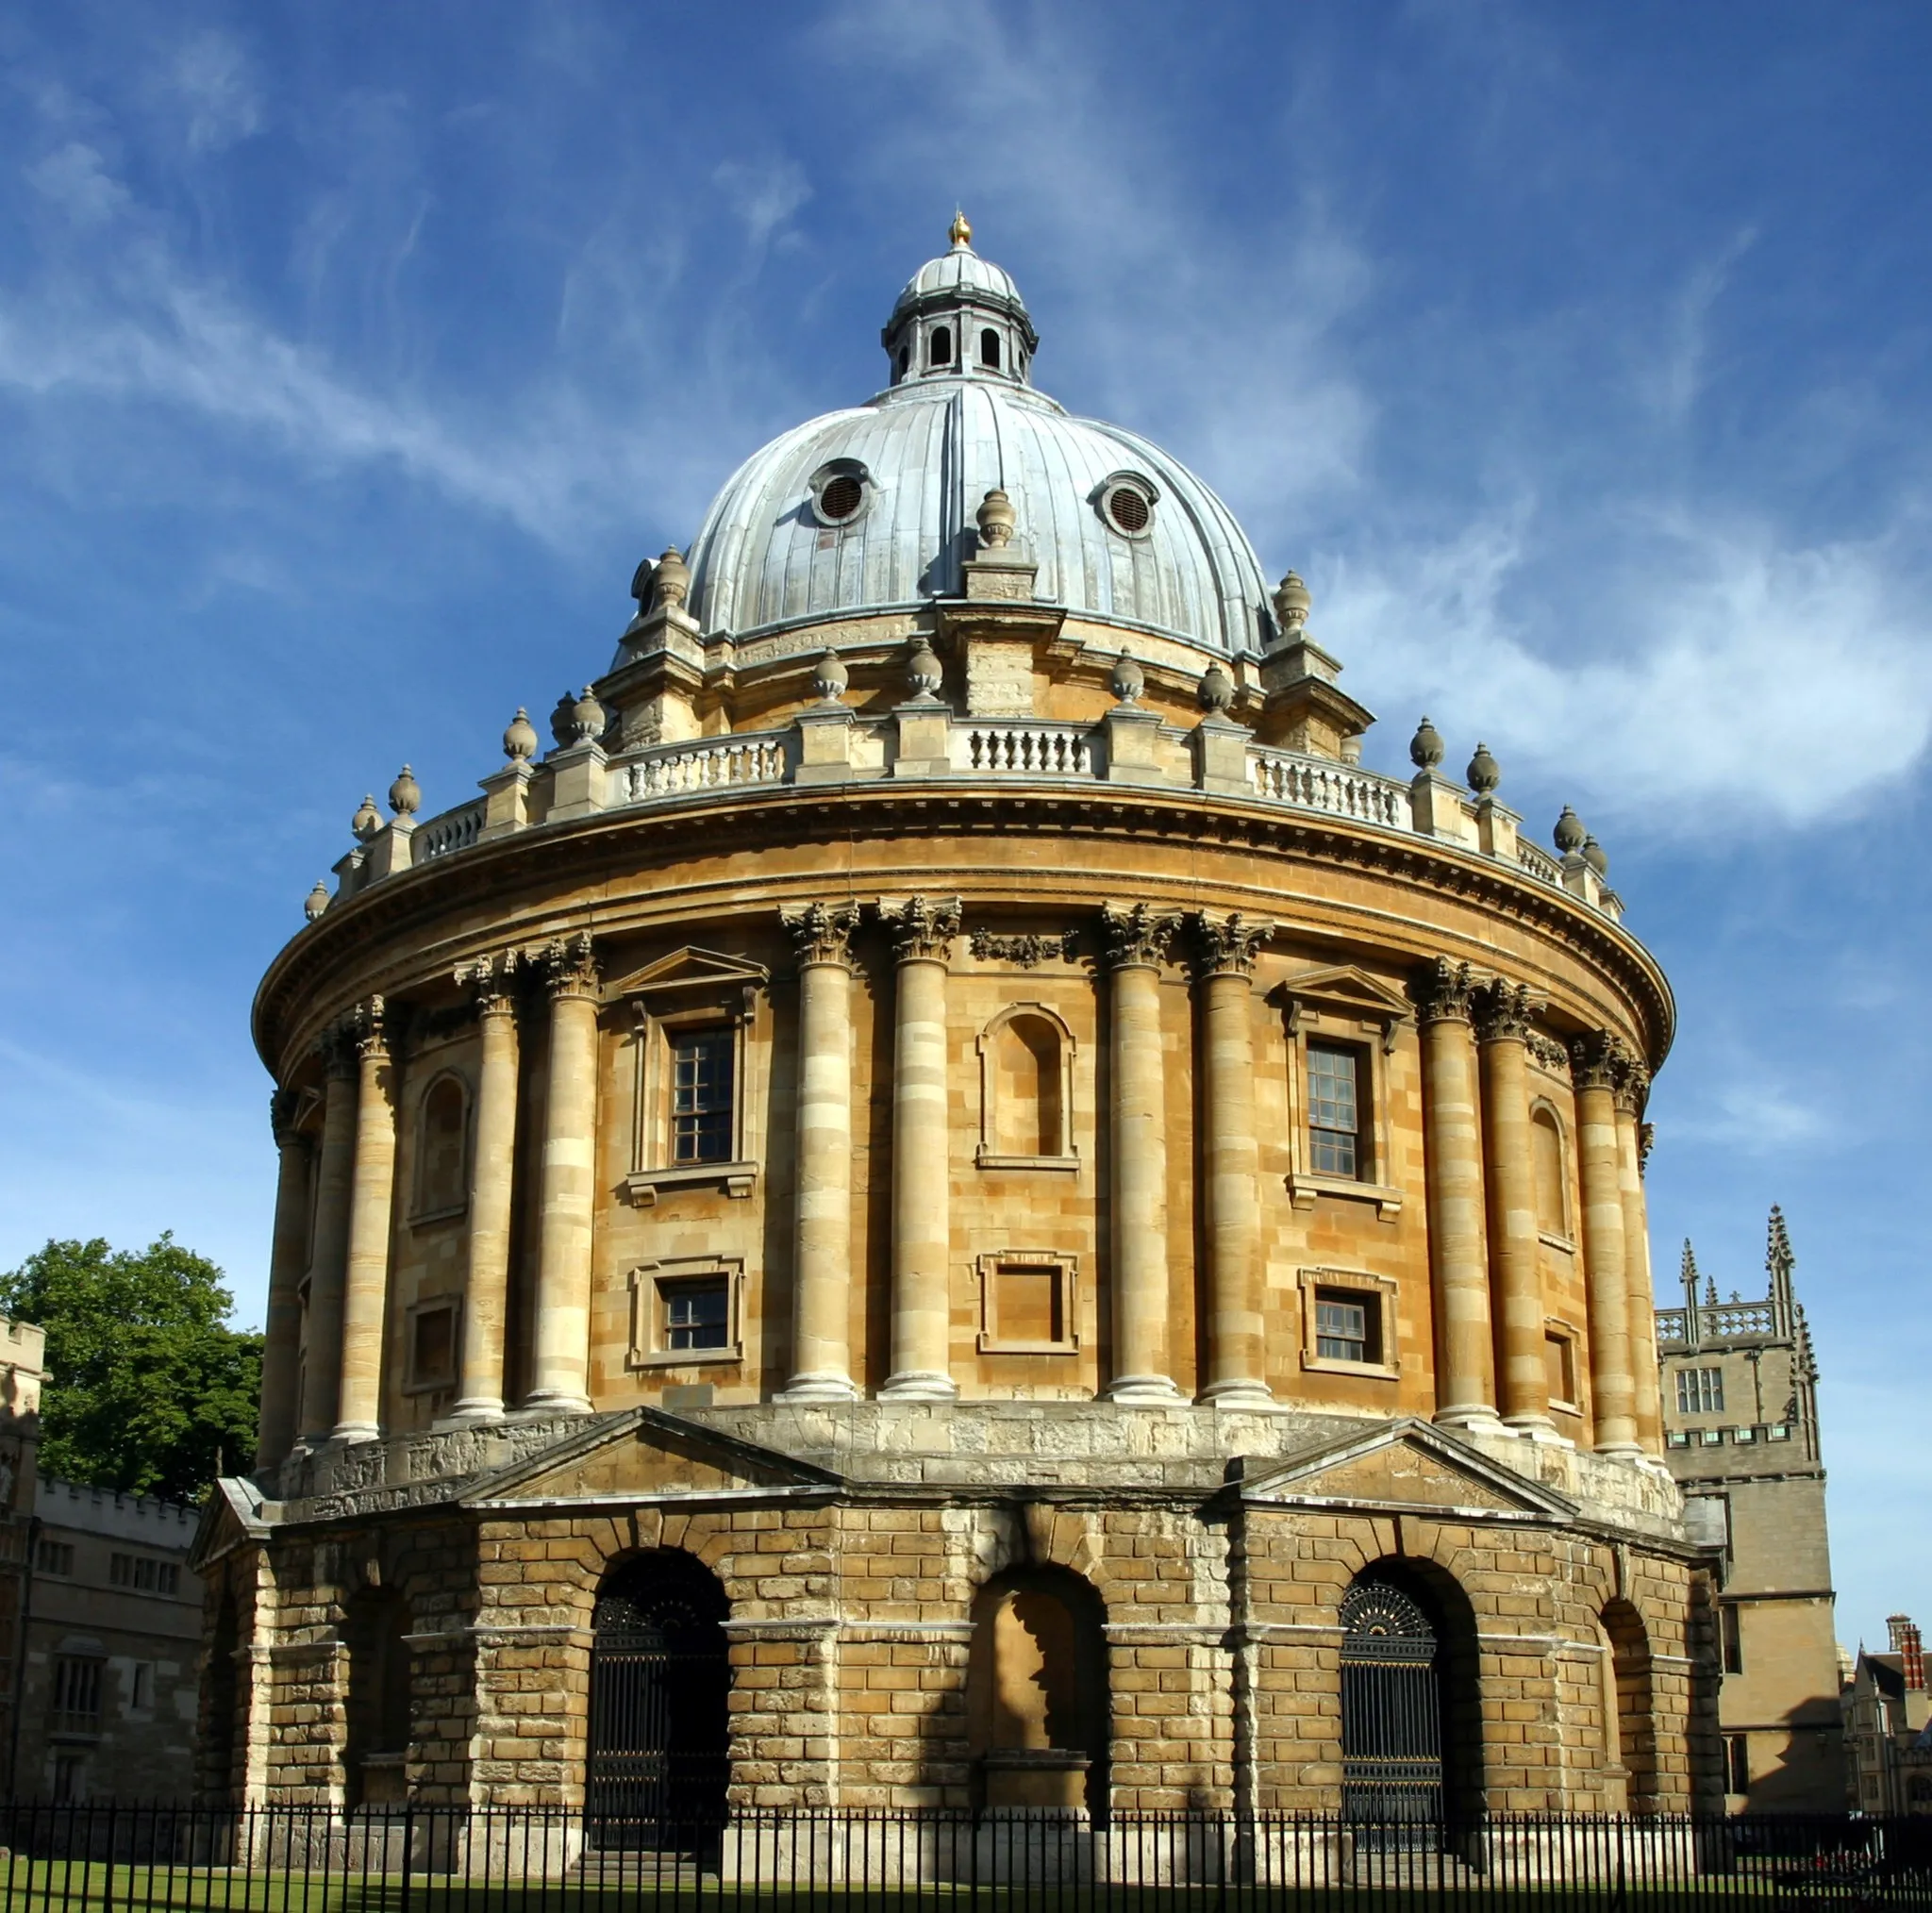 Photo showing: The Radcliffe Camera in Radcliffe Square, Oxford, England.